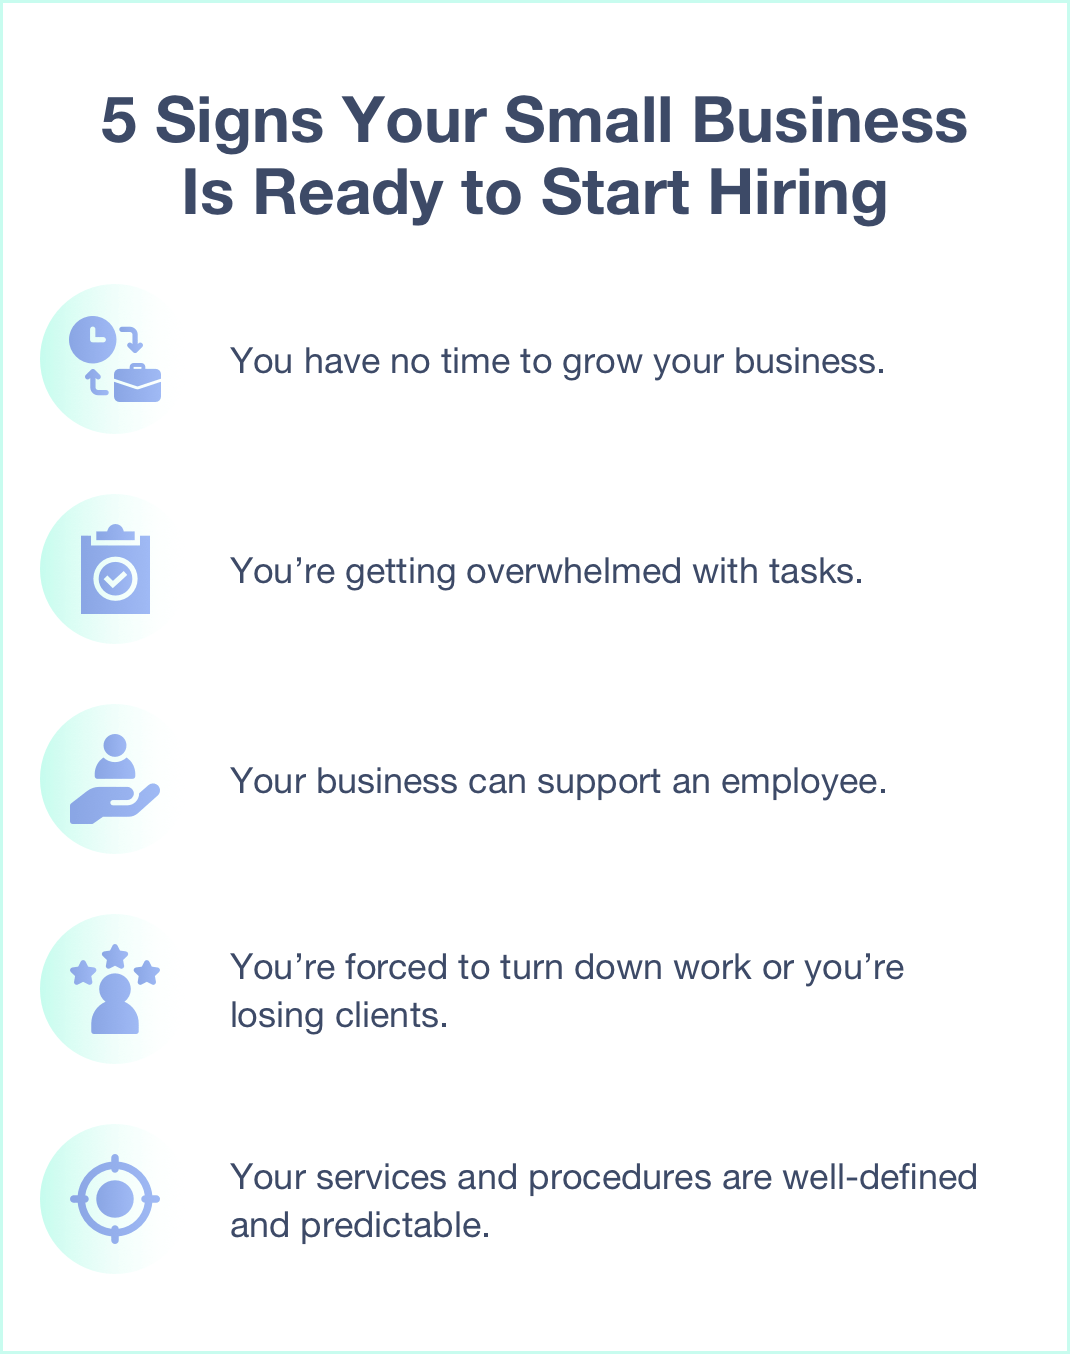 5 signs your small business is ready to start hiring